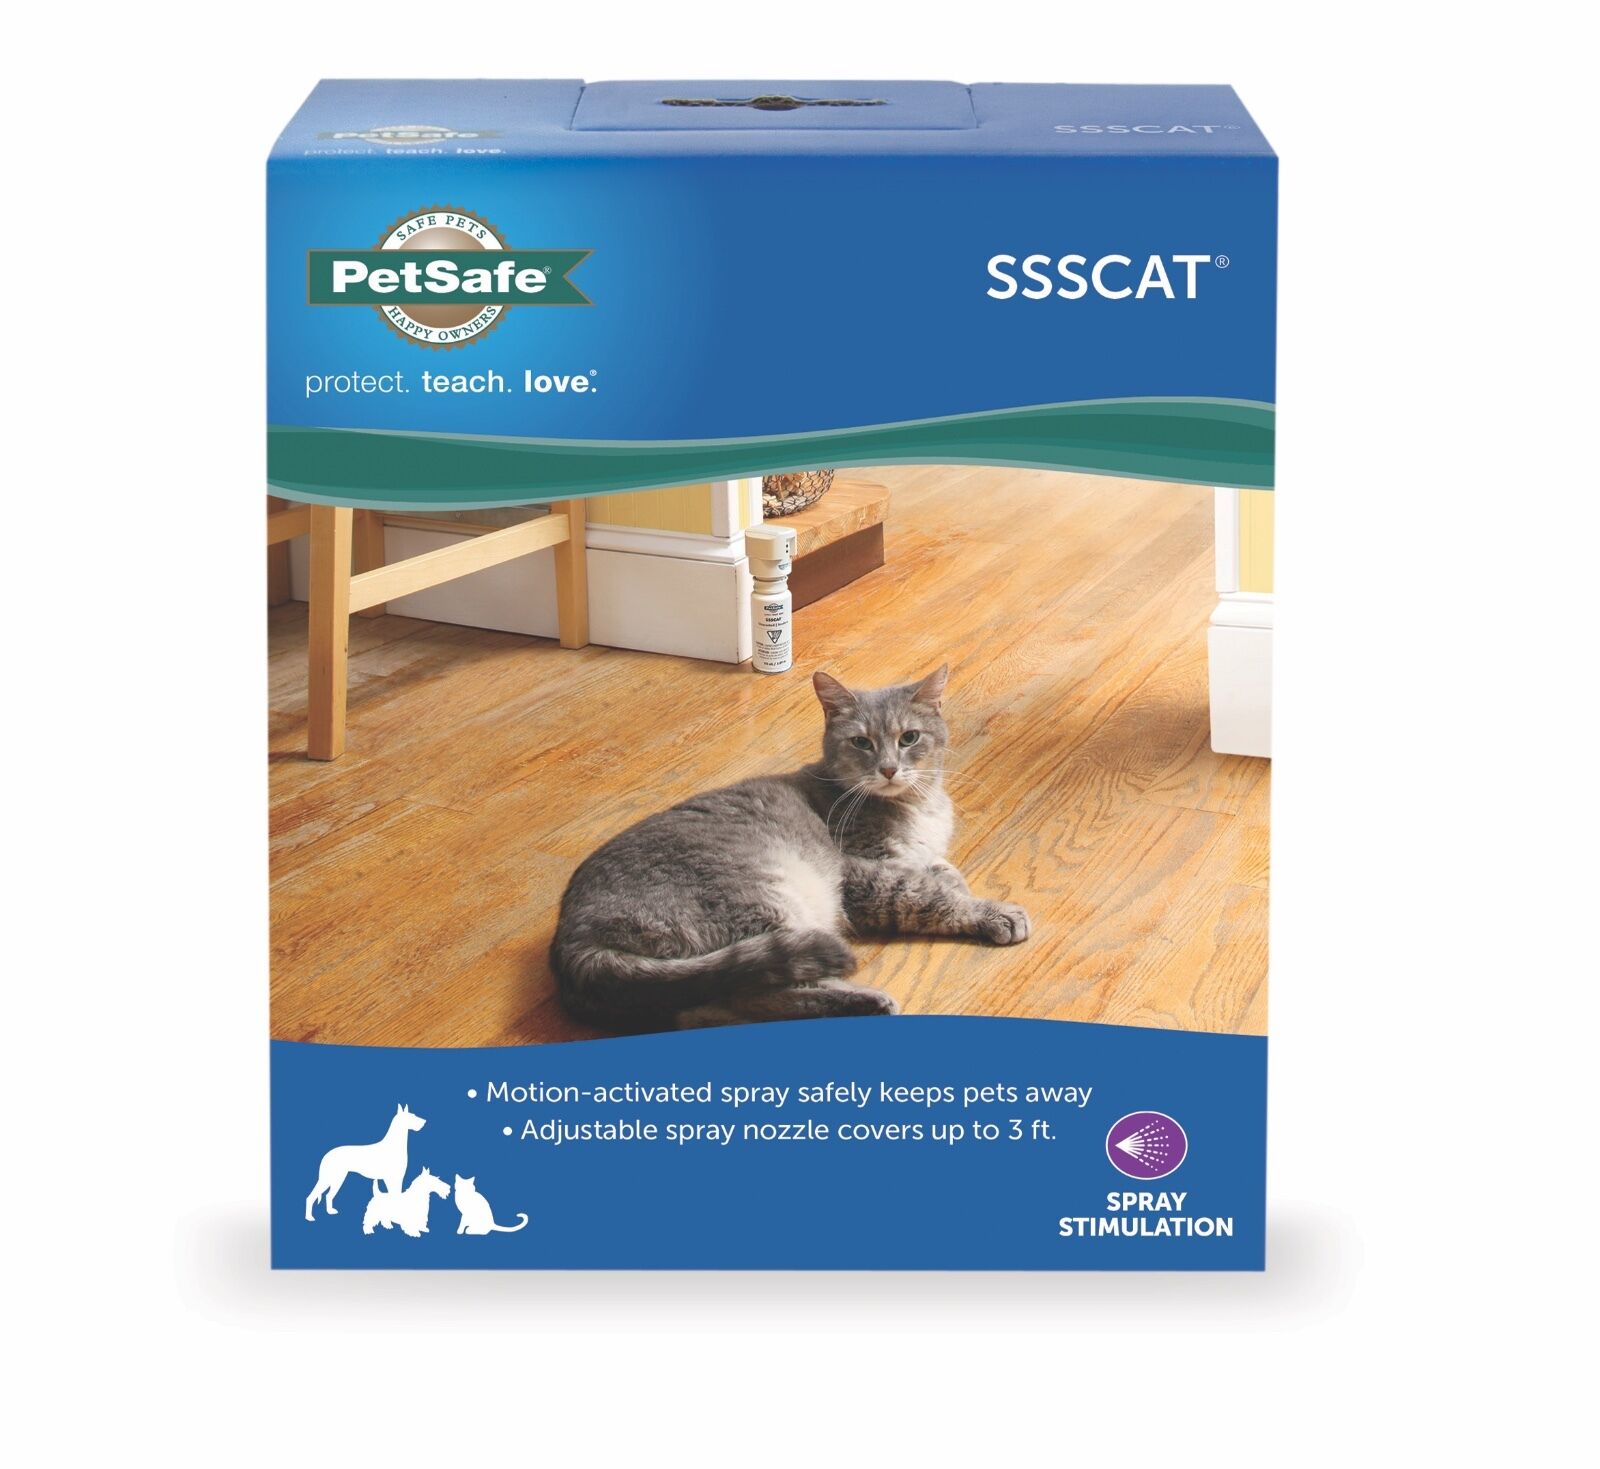 Ssscat Spray Deterrent For Pets, Dogs, Cats,  Ppd00-16168